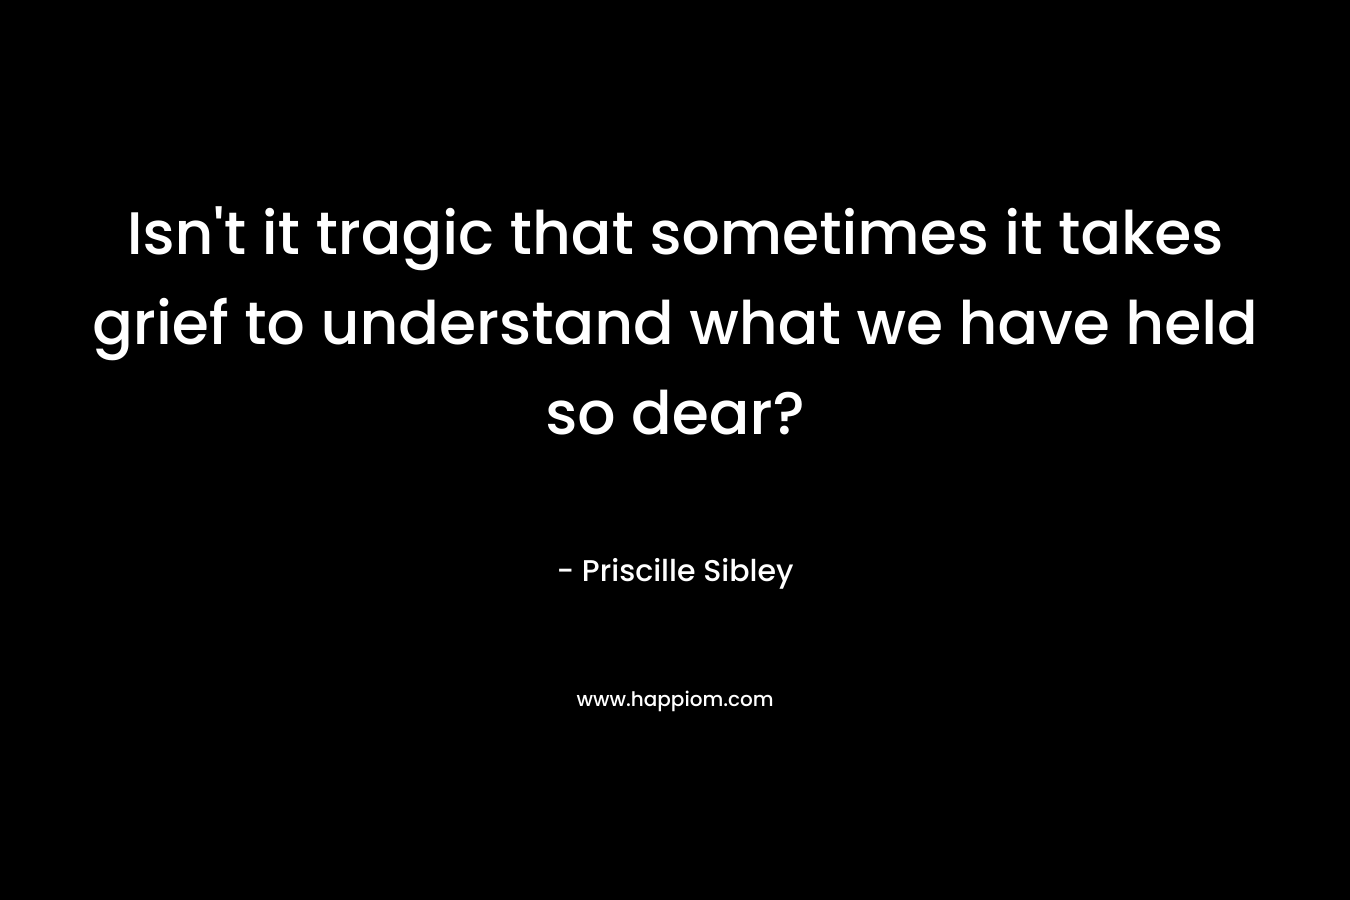 Isn't it tragic that sometimes it takes grief to understand what we have held so dear?